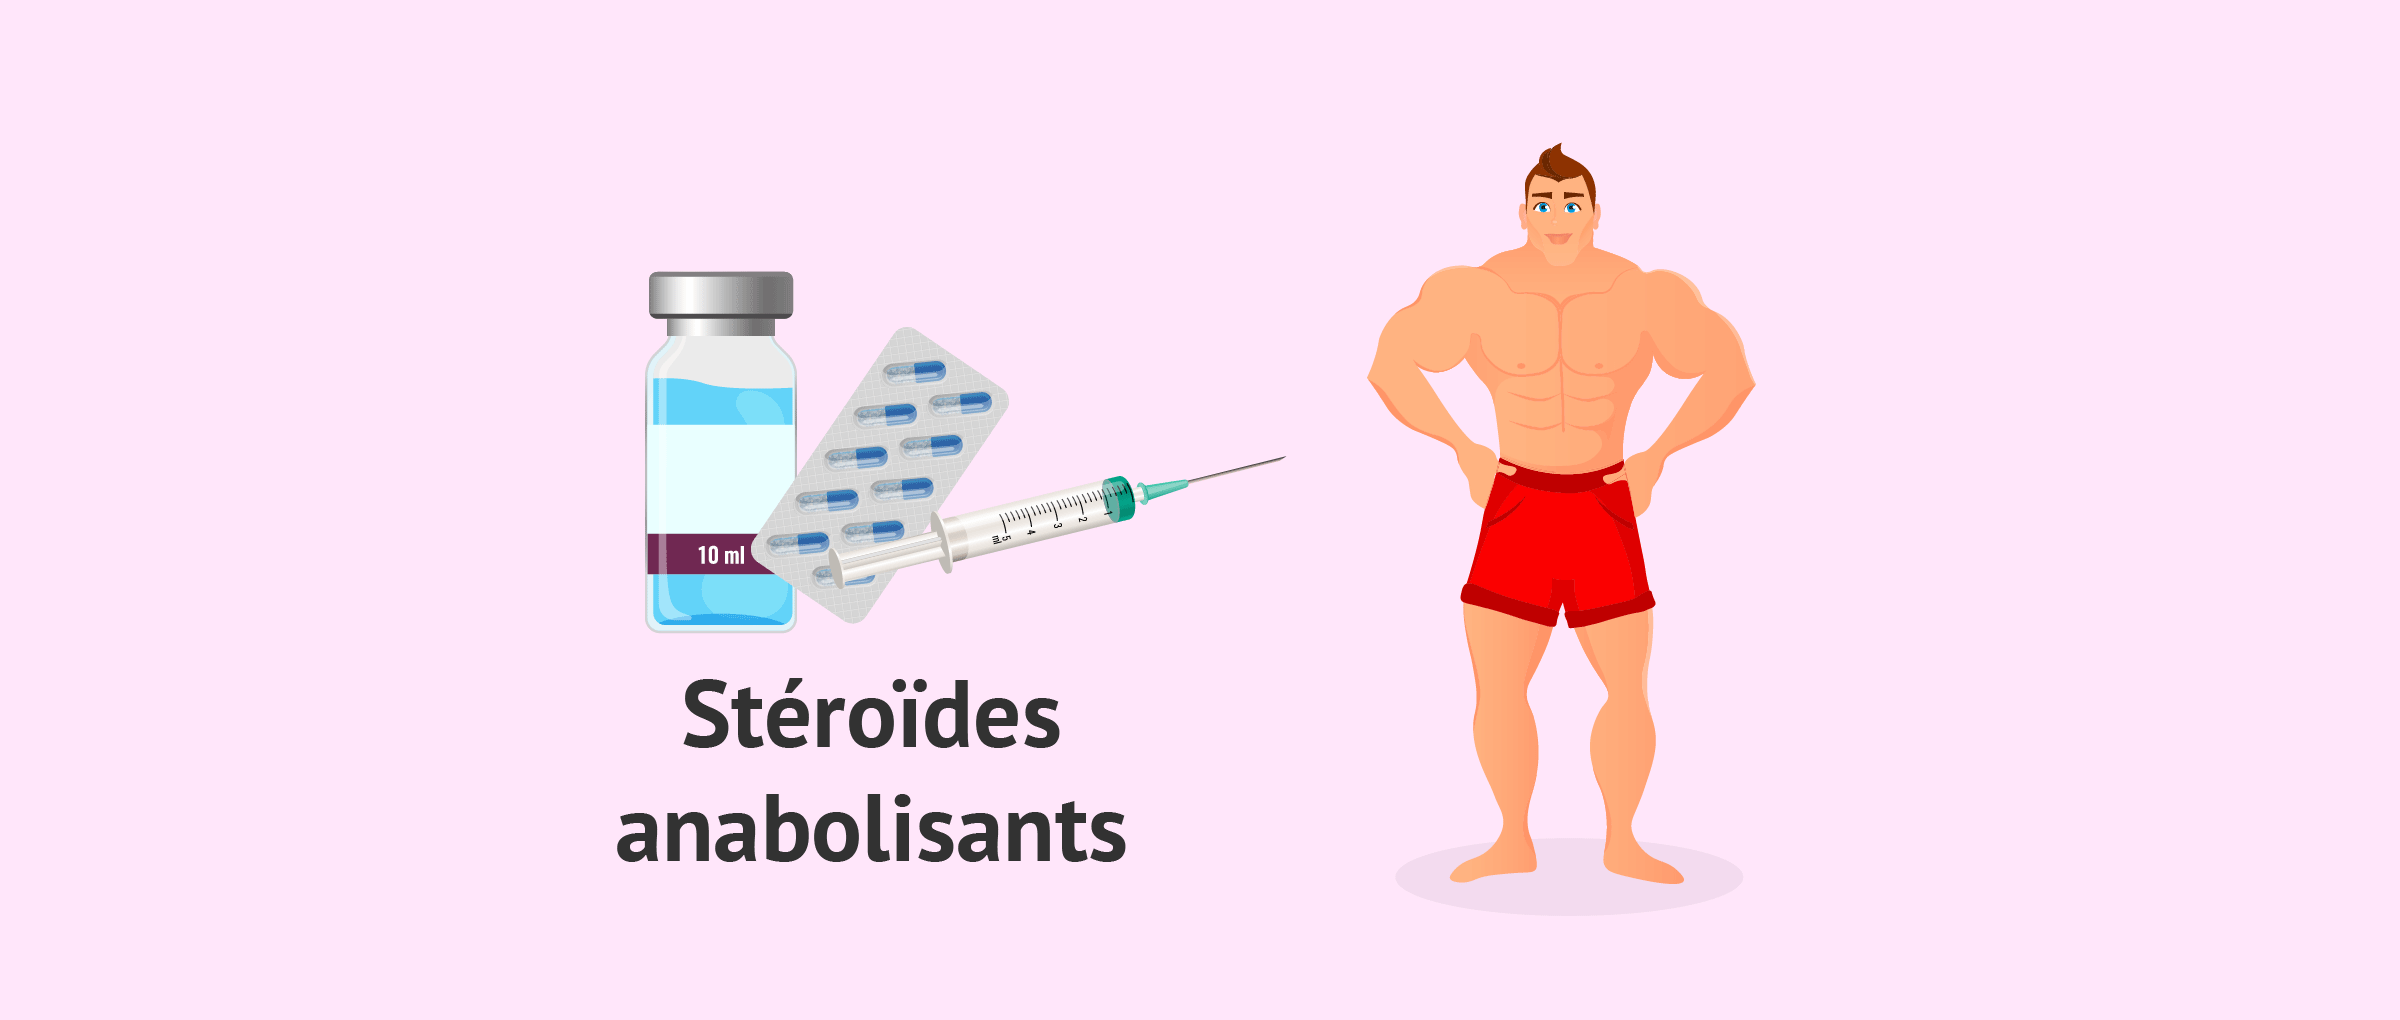 52 Ways To Avoid steroide malay tiger Burnout